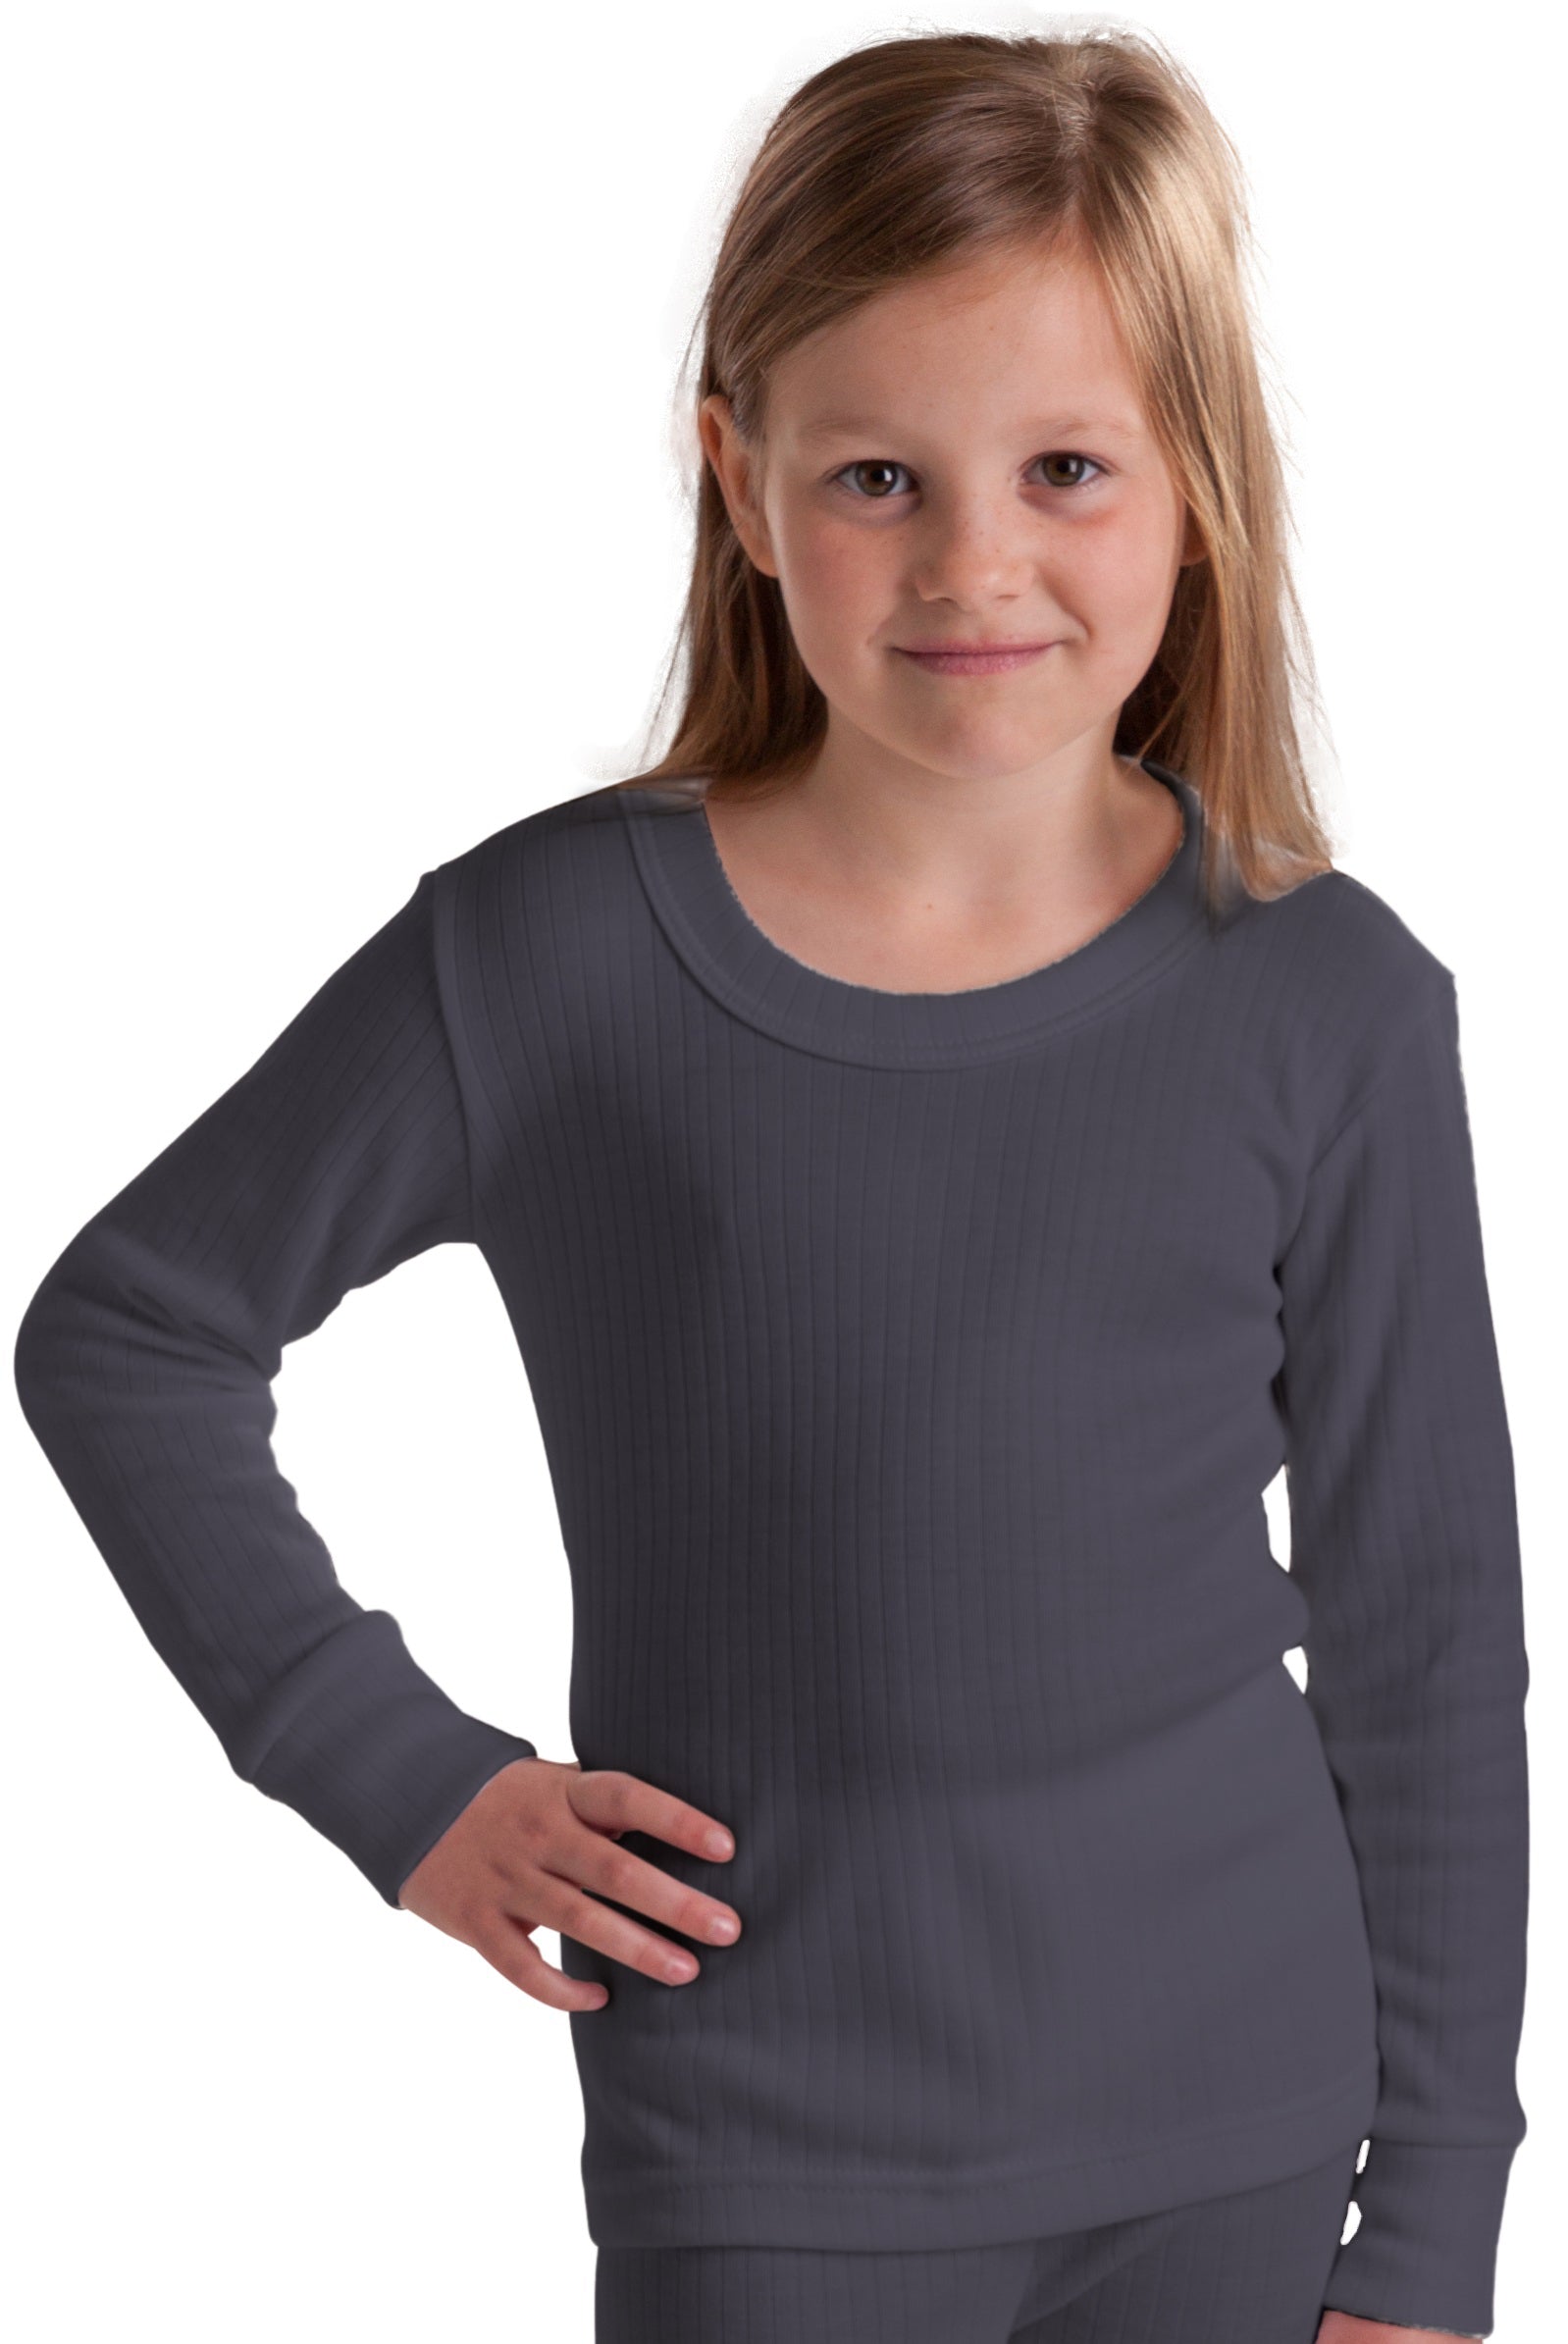 Girls Thermal Underwear - Short/Long Sleeve Top and Long Pants - British  Thermals